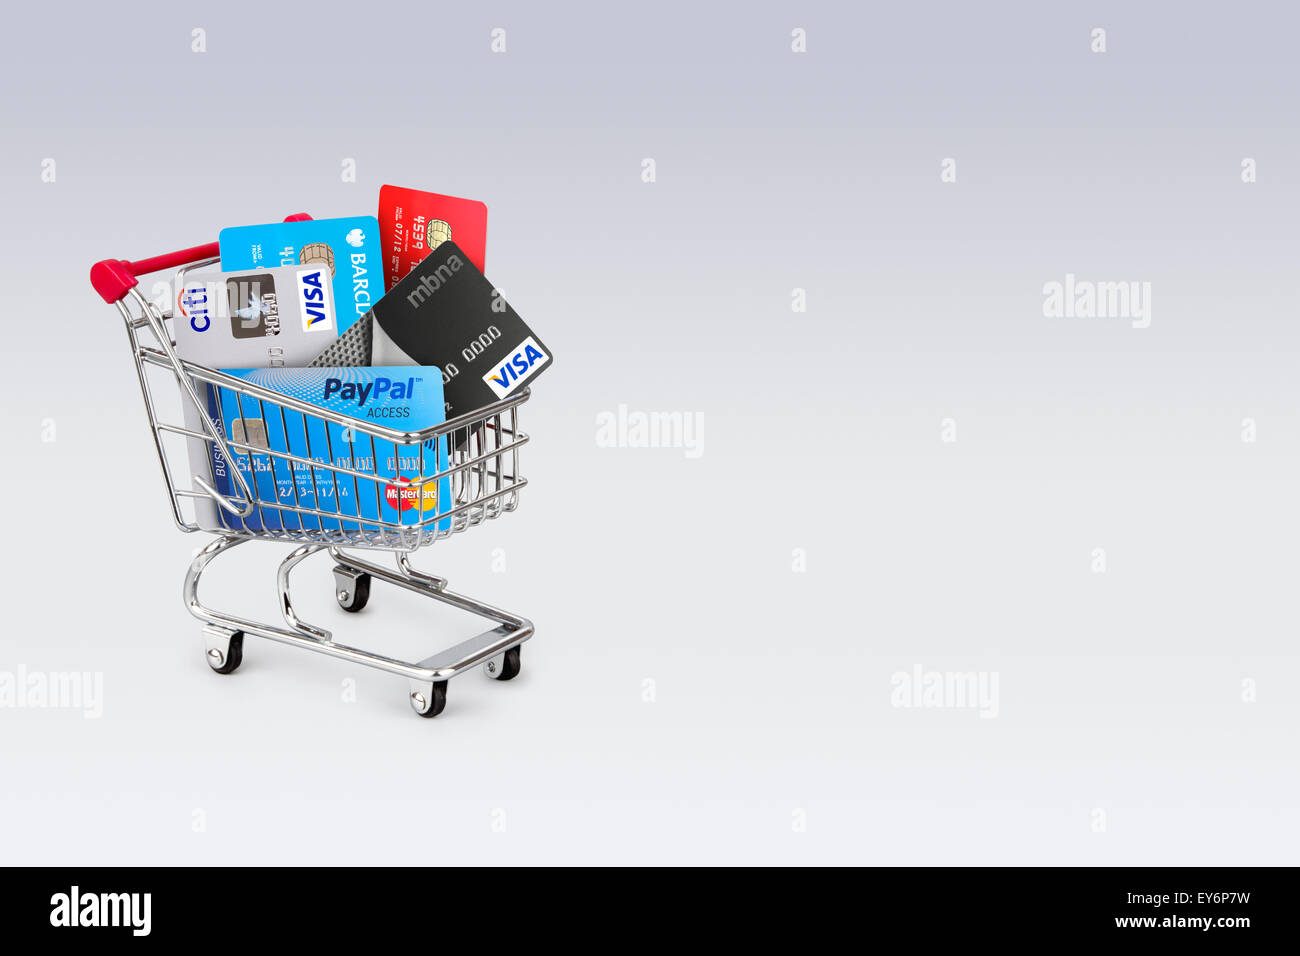 A selection off credit cards,bank cards and store cards in a shopping Trolley Stock Photo